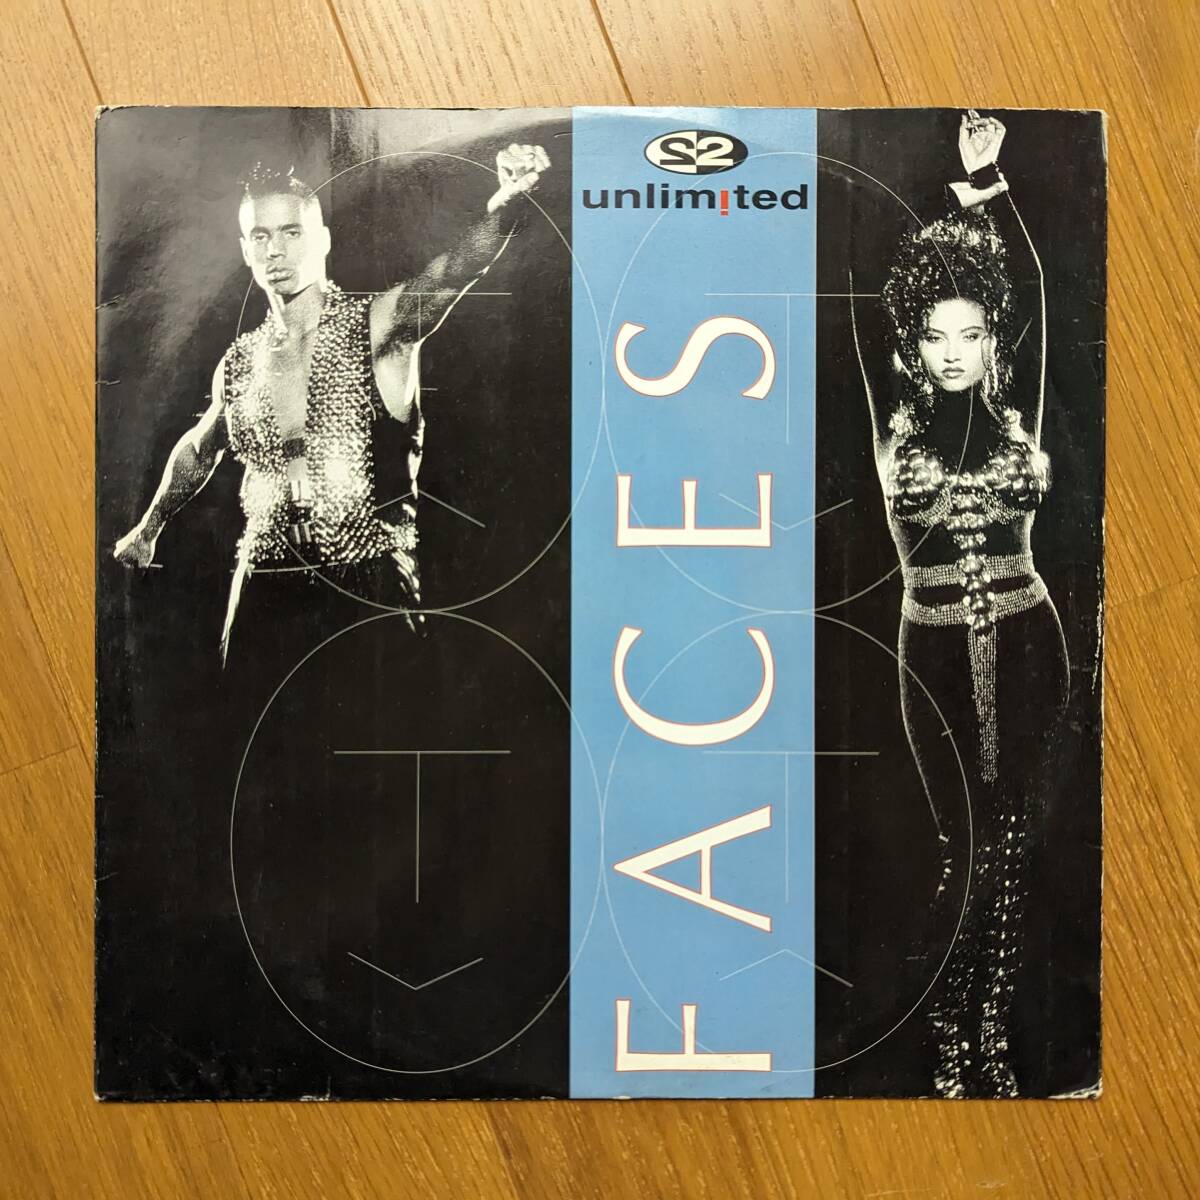 2 Unlimited - Facesの画像1